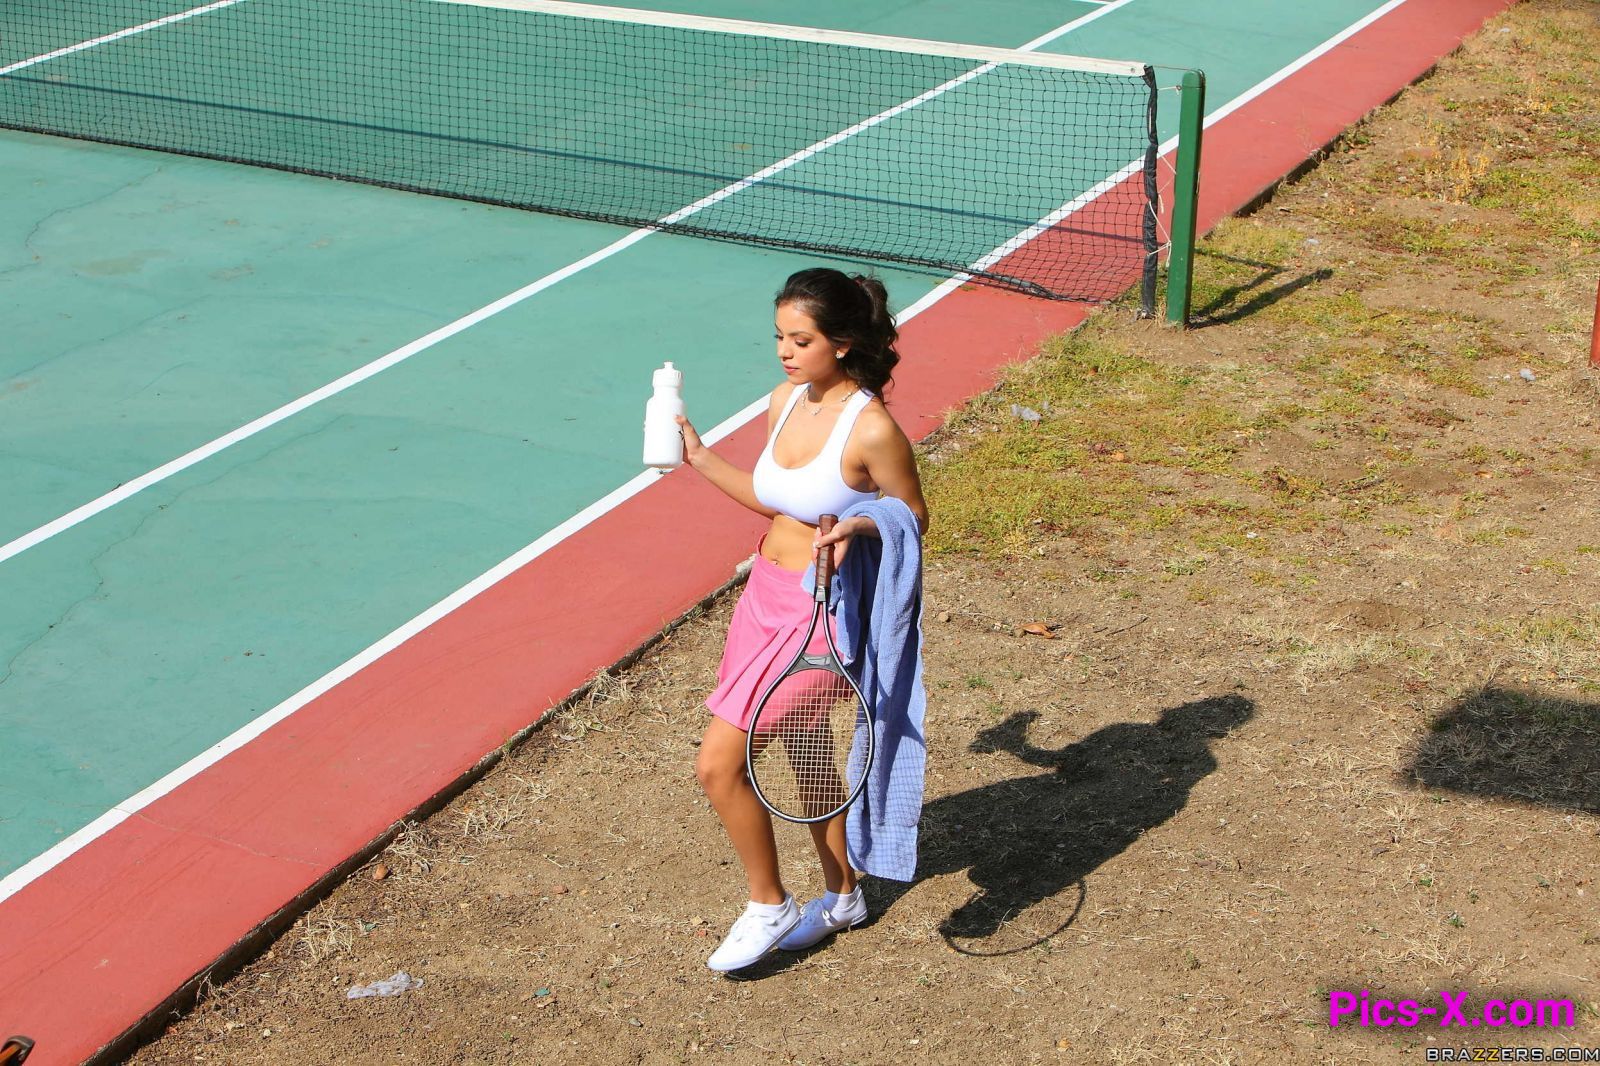 Playing with my Tennis Balls - Big Tits In Sports - Image 14